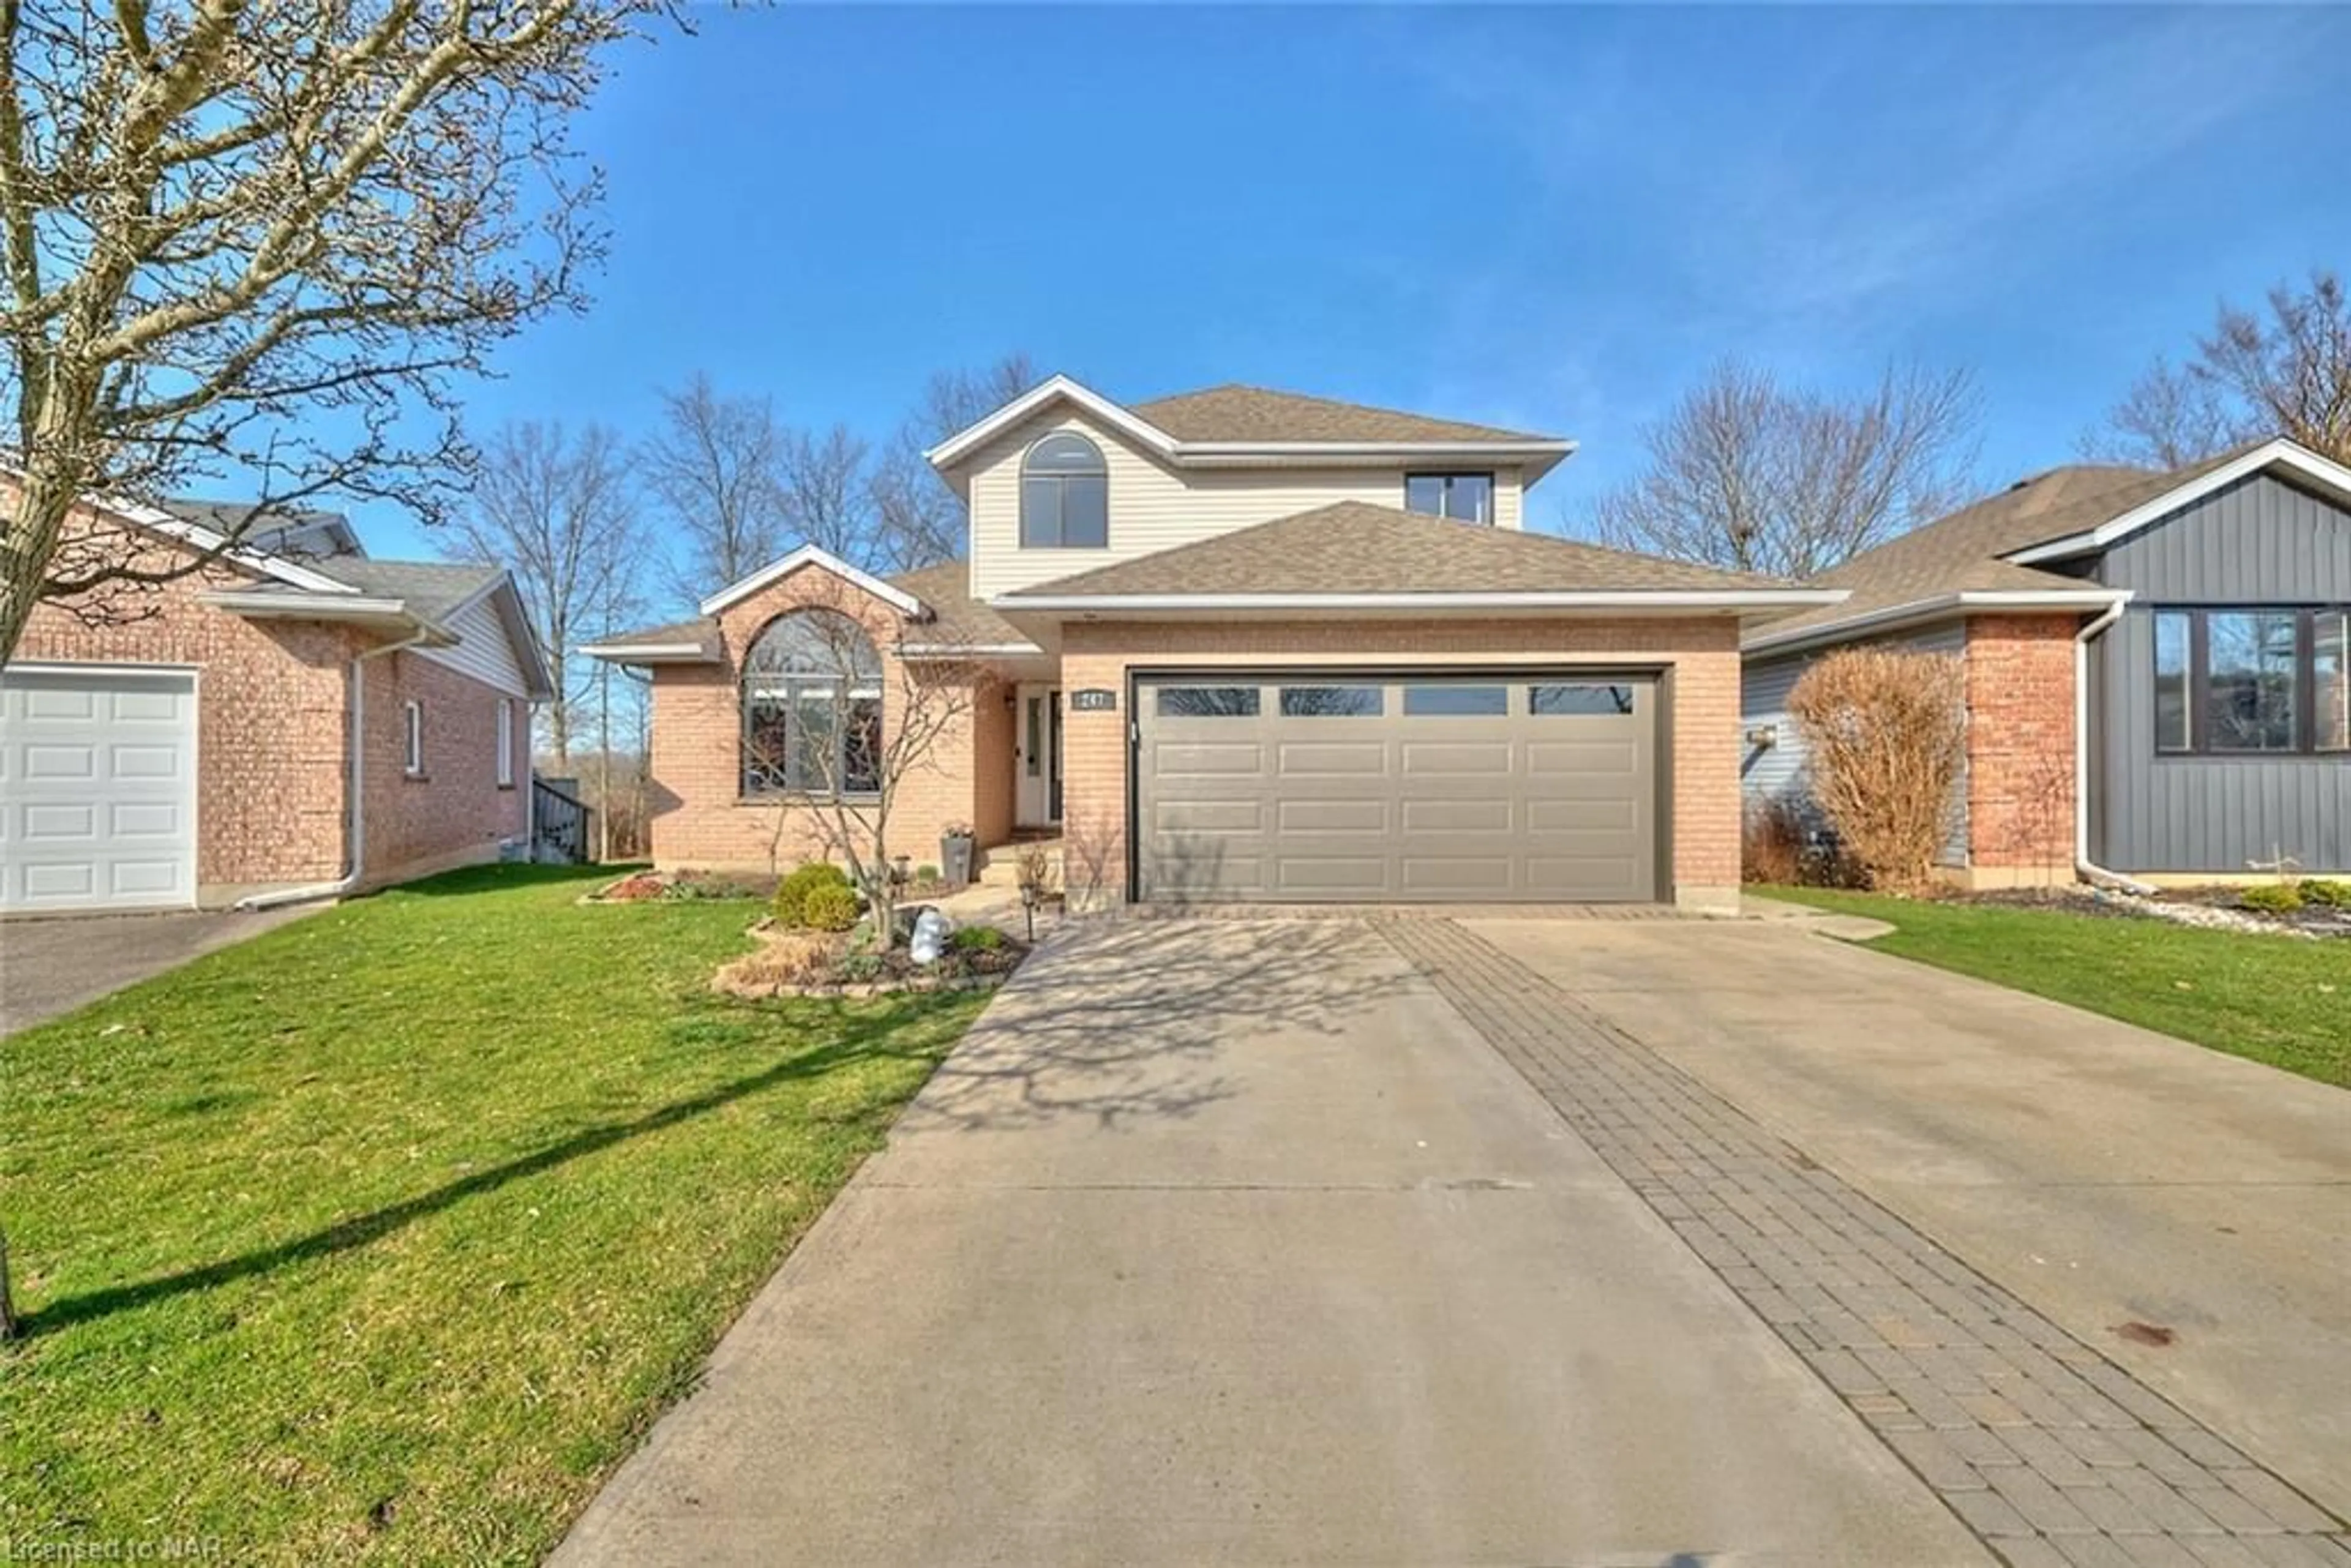 Frontside or backside of a home for 247 Balsam St, Welland Ontario L3C 7H1